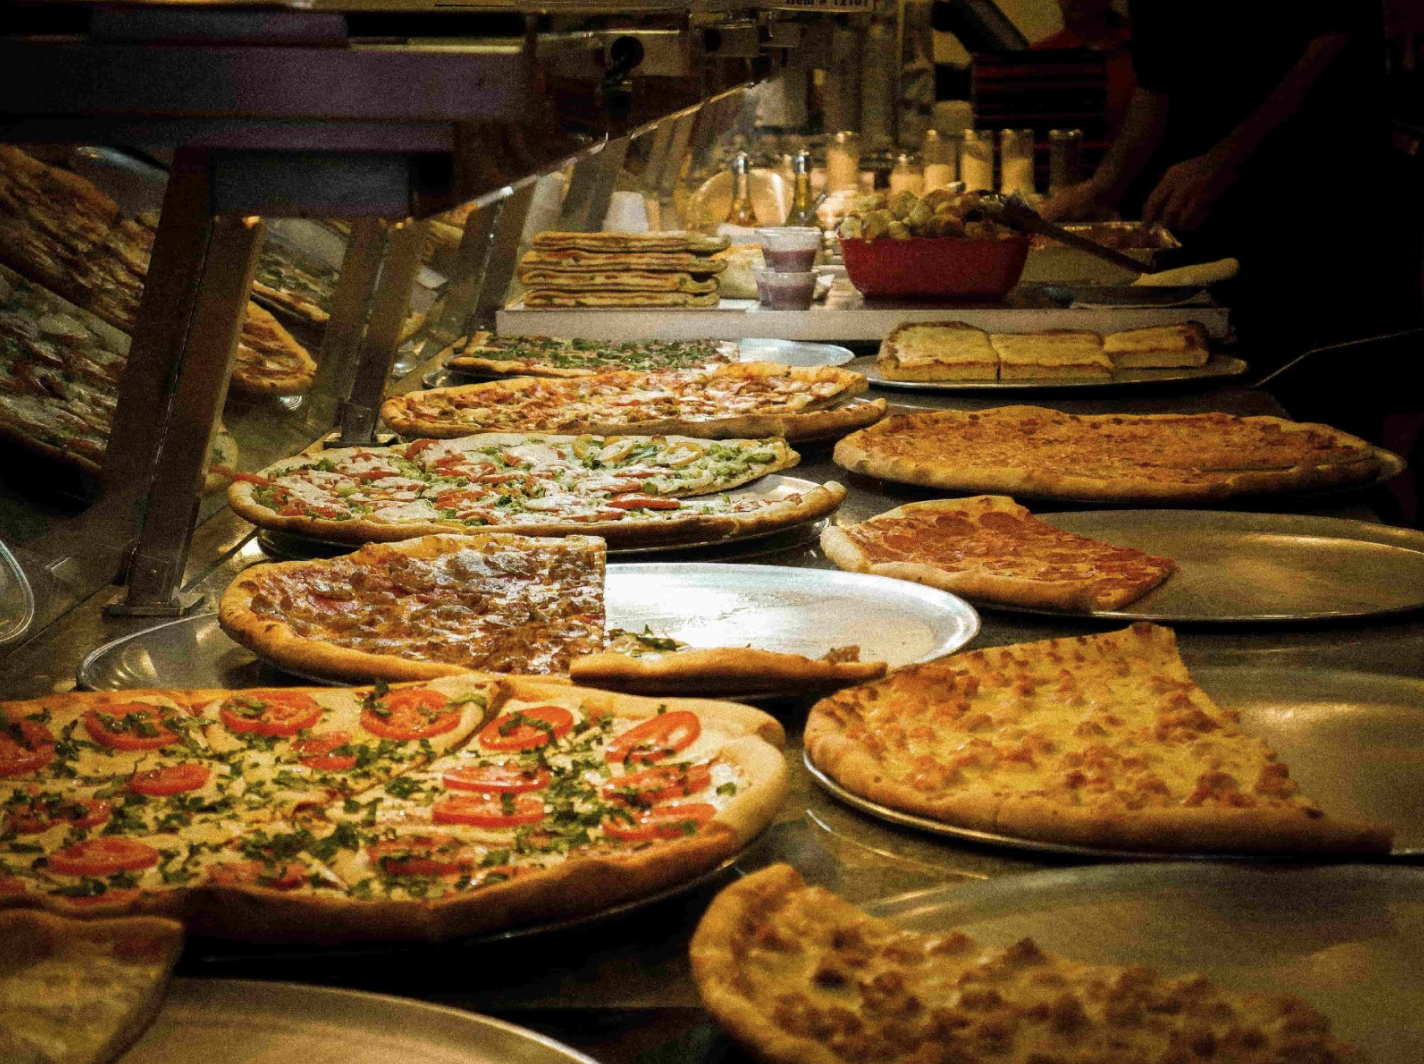 A restaurant counter with different types of pizza on it.